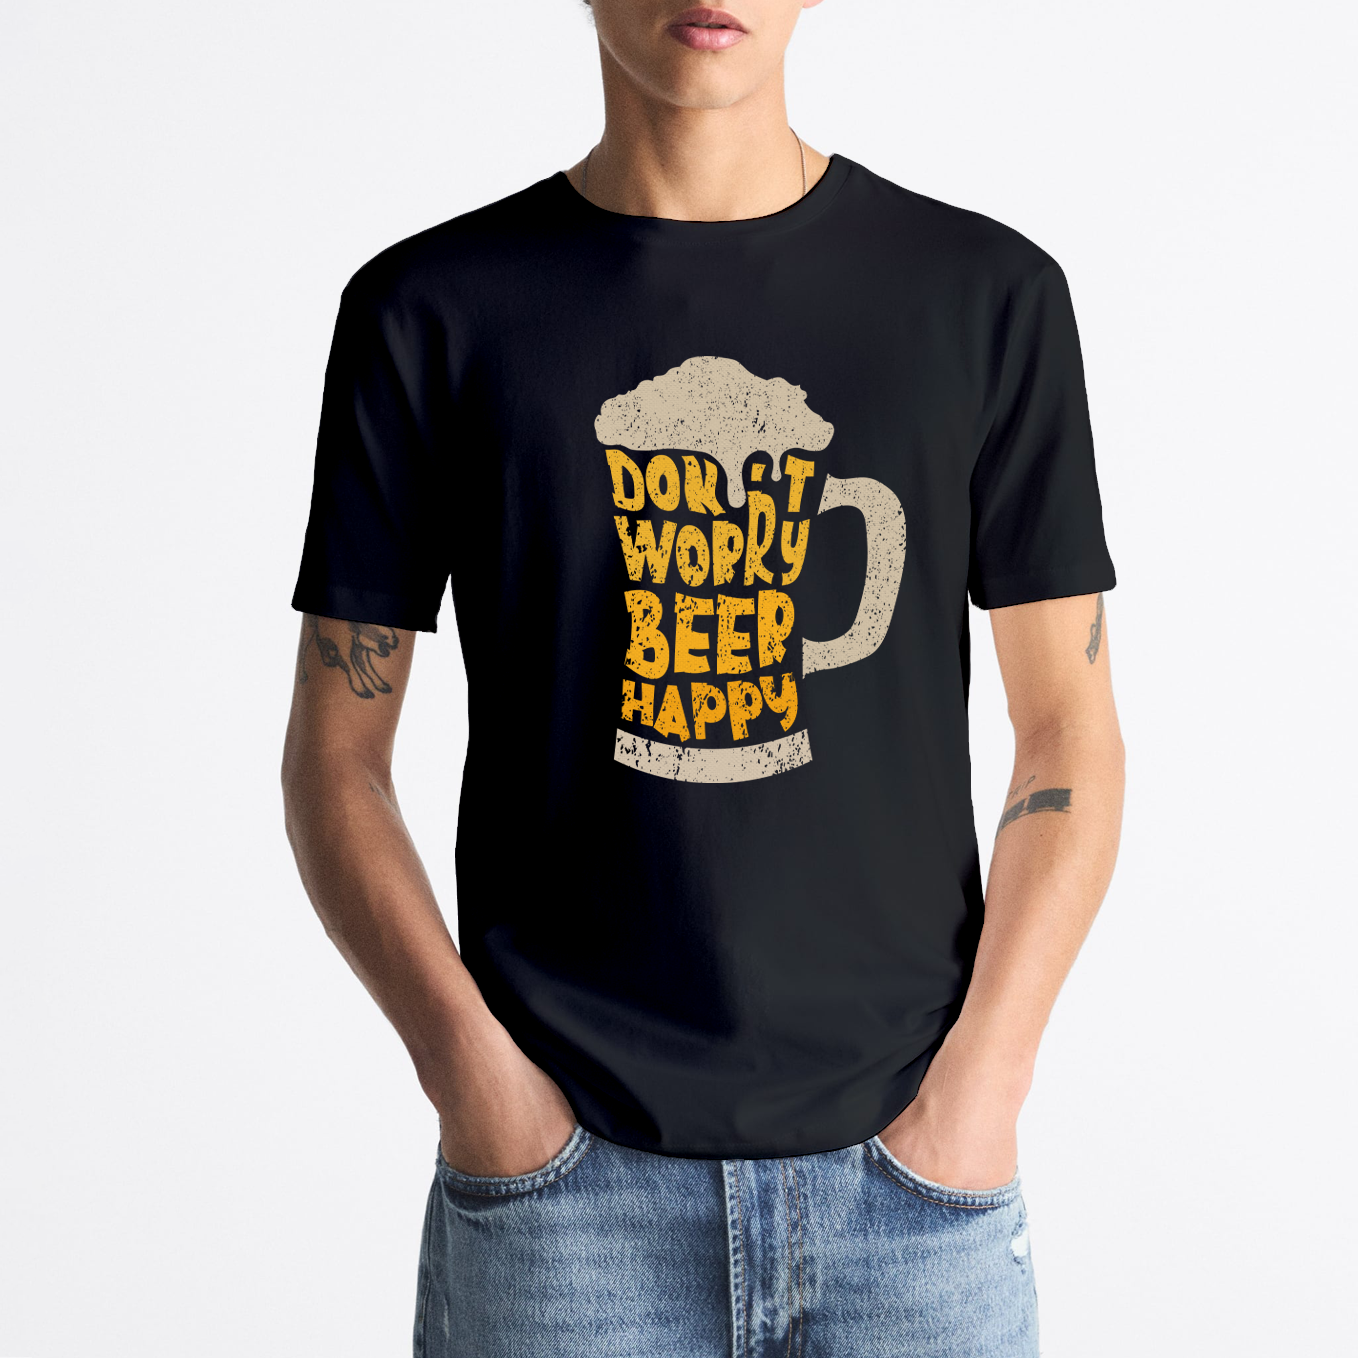 T-shirt "Don't worry Beer happy"